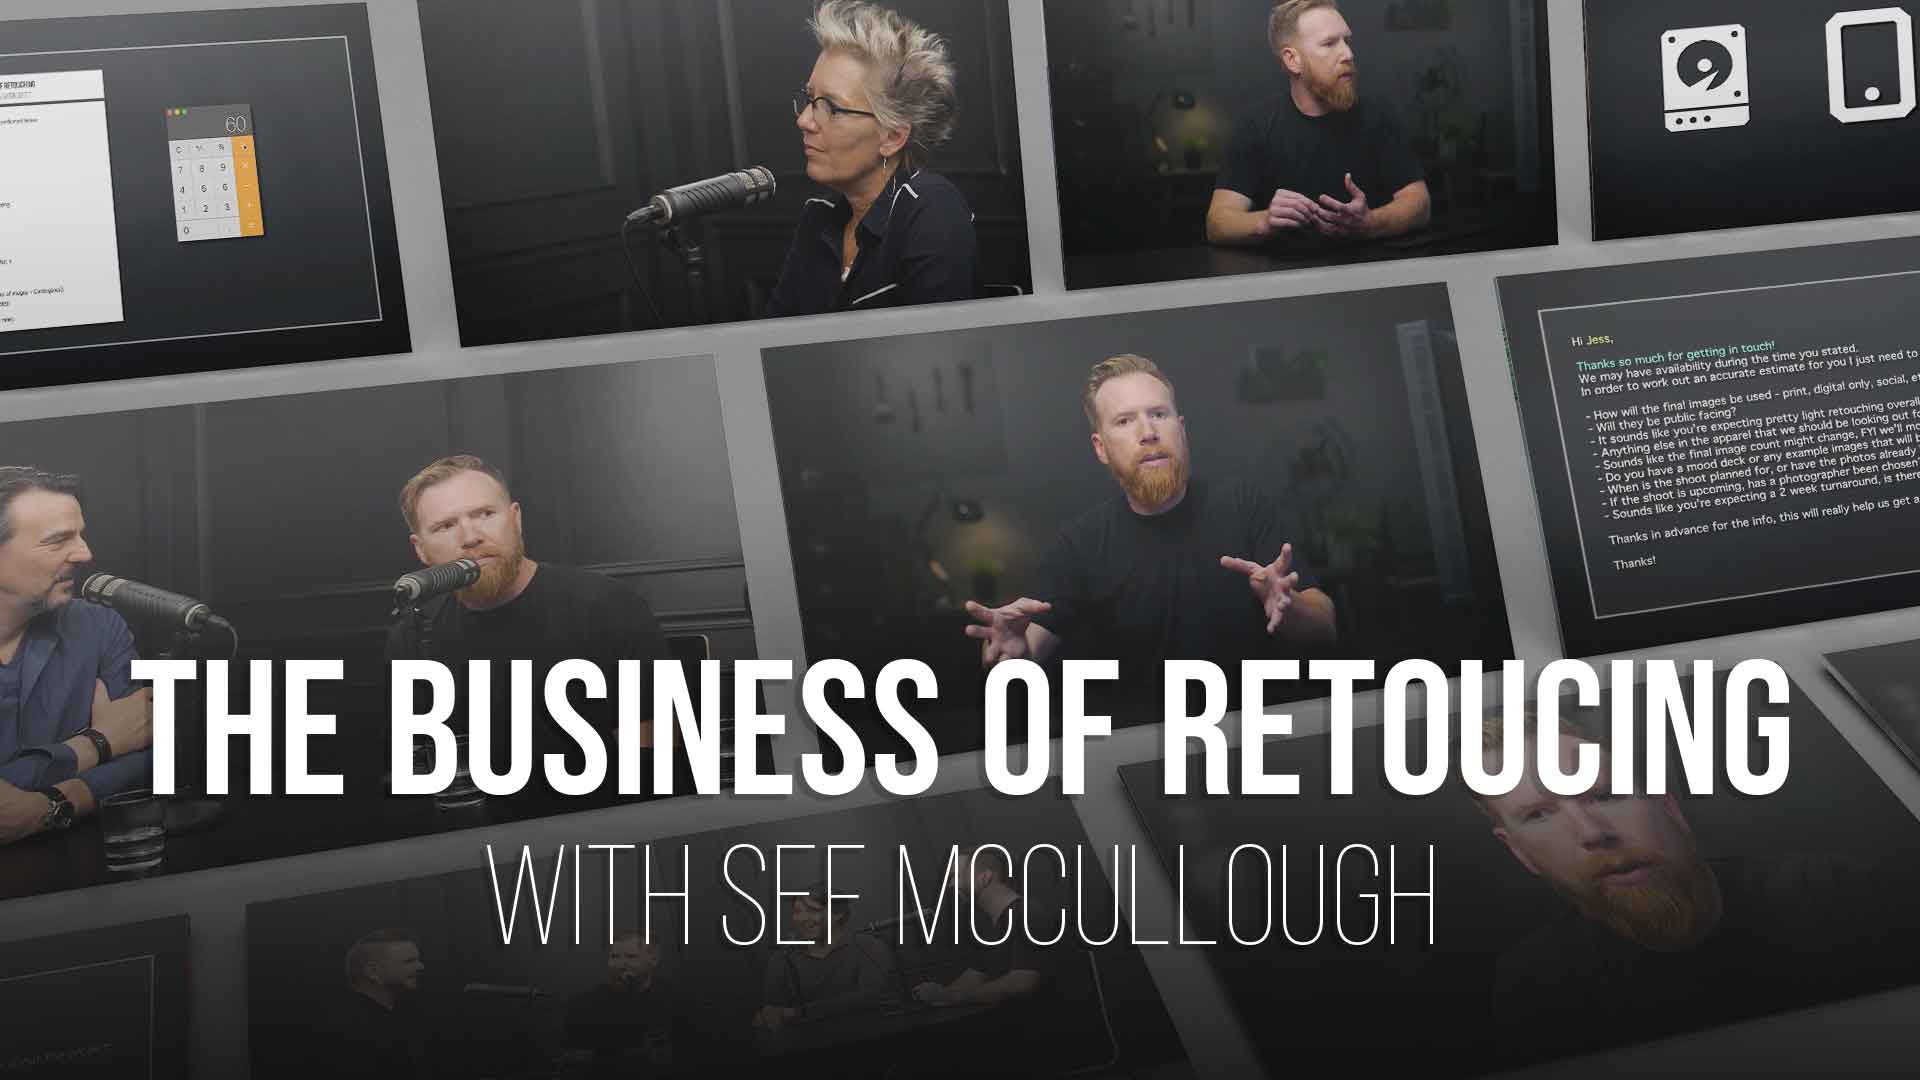 Commercial retouching is a business that Sef McCullough has mastered. PRO EDU's tutorial brings you the insight to build your retouching business.